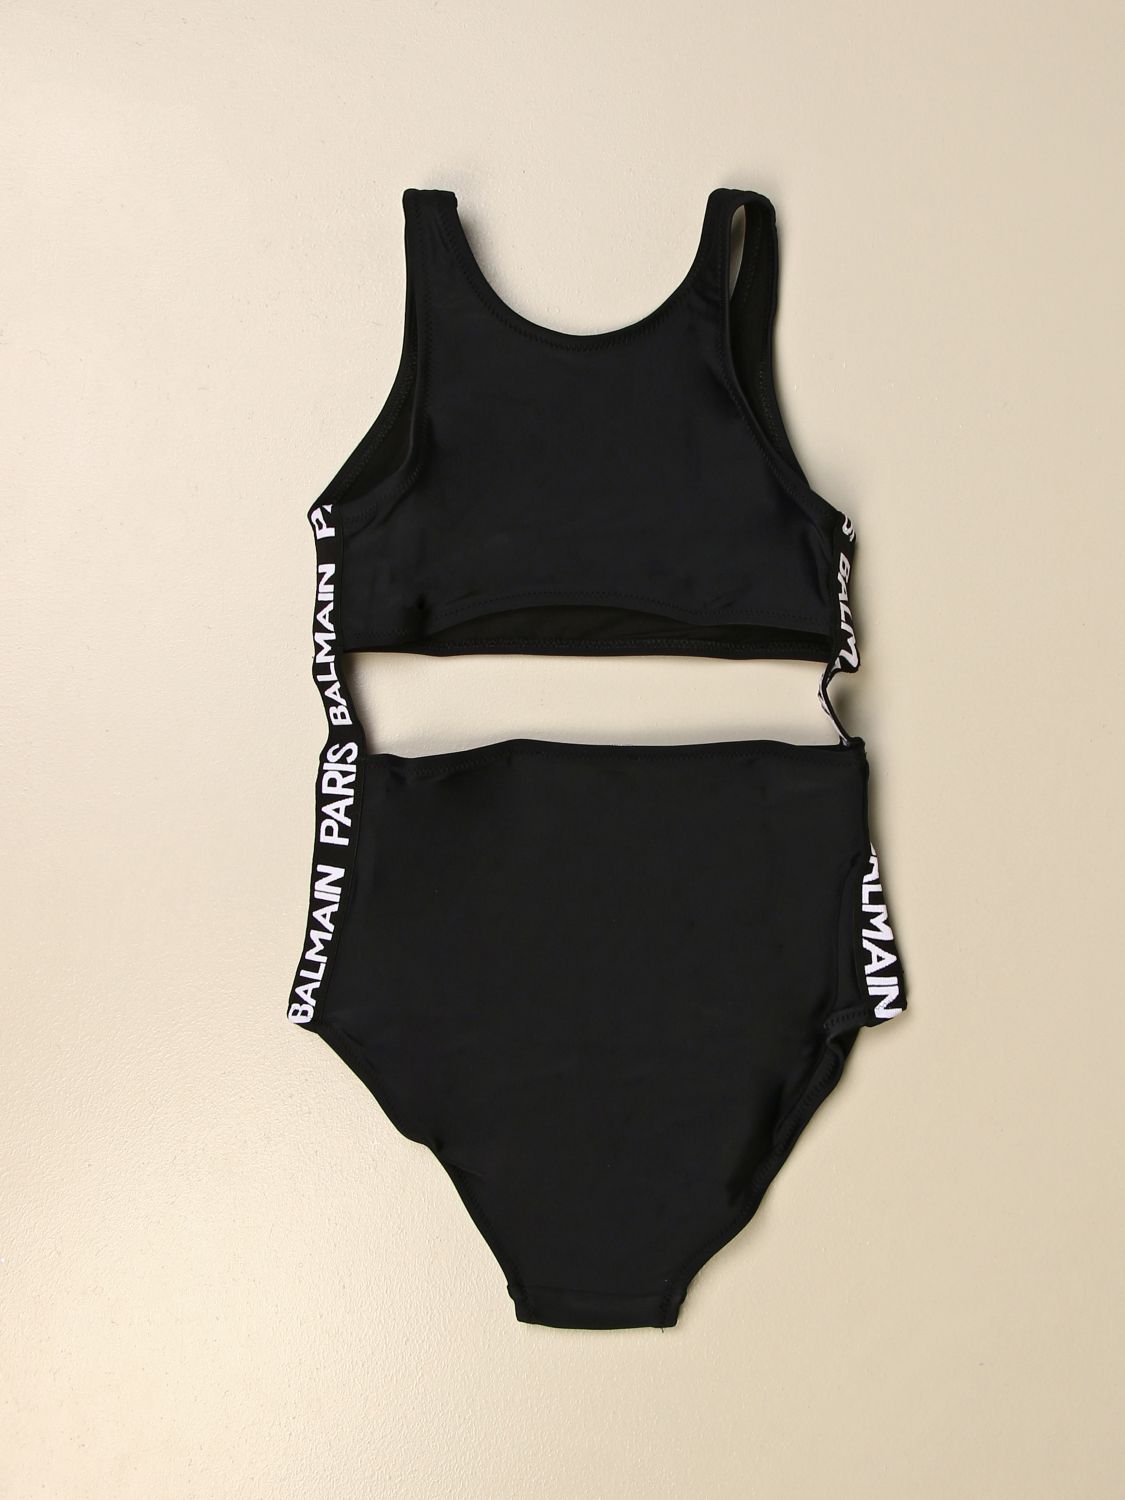 Datter ros sprogfærdighed BALMAIN: one-piece swimsuit with logoed bands | Swimsuit Balmain Kids Black  | Swimsuit Balmain 6M0029 MX400 GIGLIO.COM